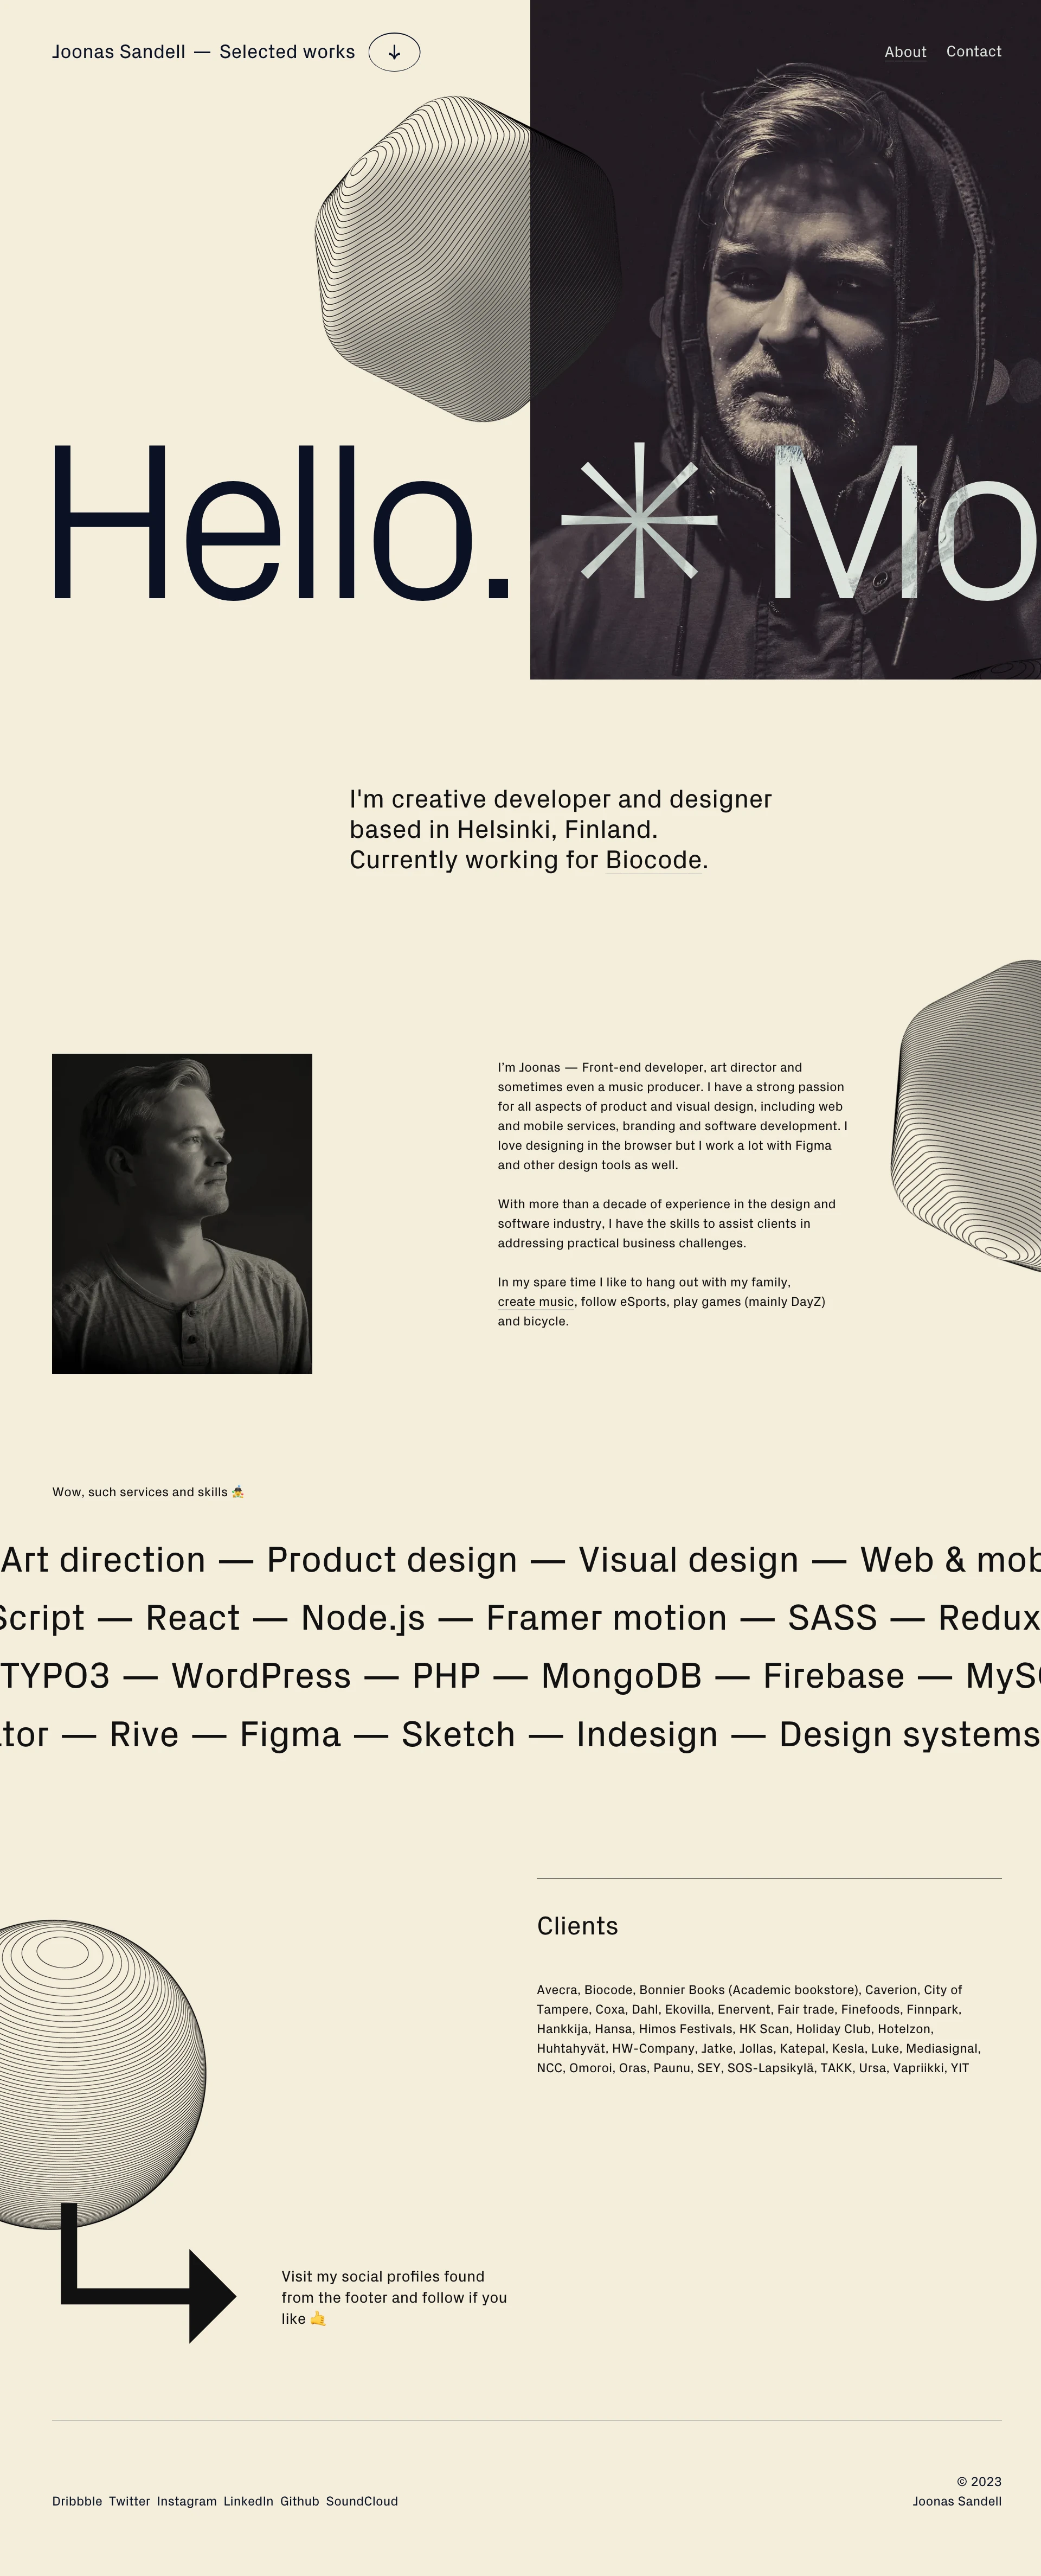 Joonas Sandell Landing Page Example: Portfolio of Joonas Sandell, UI/UX designer and creative developer of things that usually appear on screens.